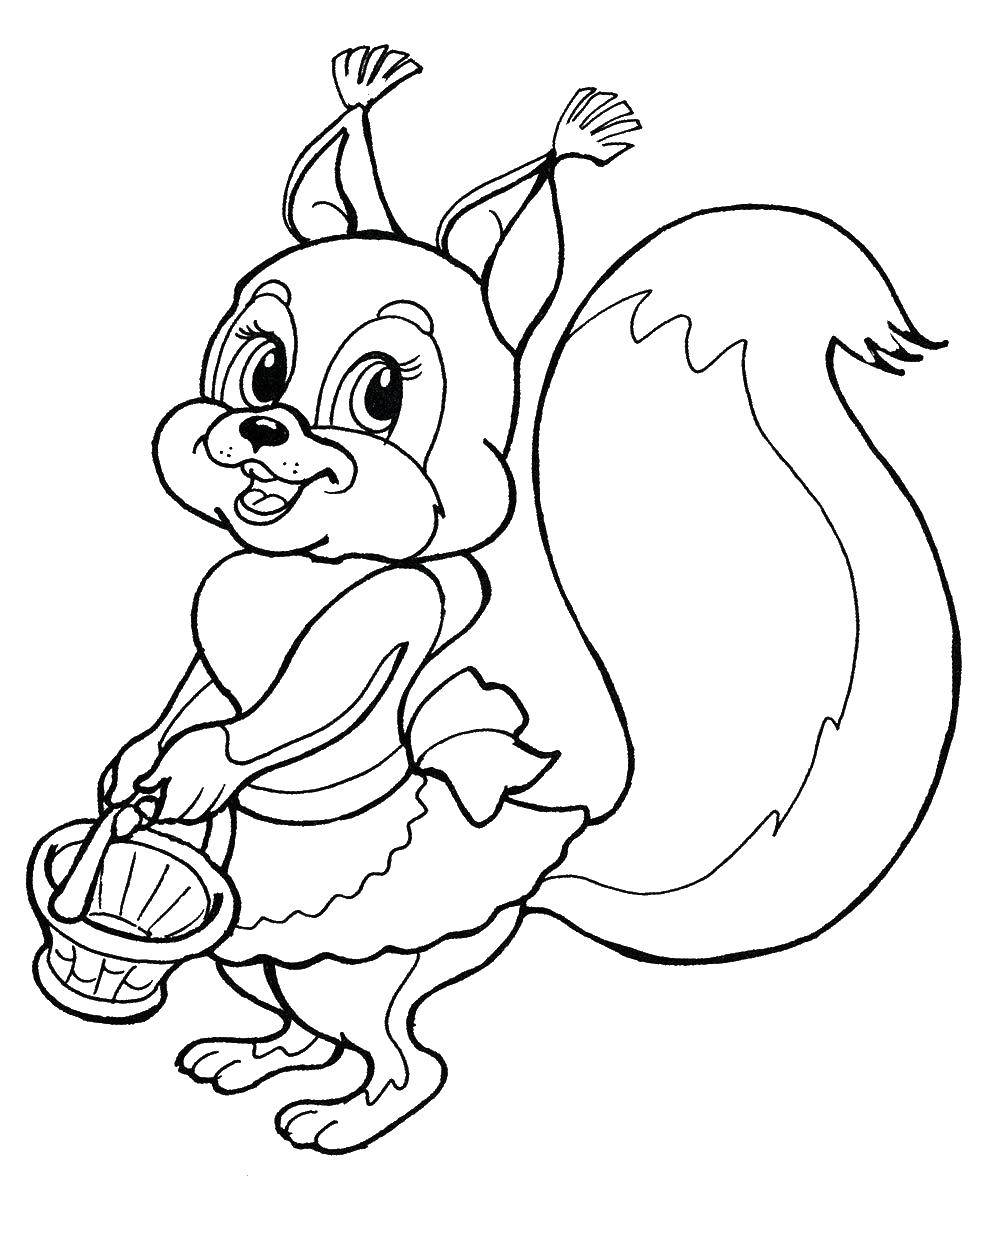 Coloring Squirrel with basket. Category squirrel. Tags:  squirrel, nuts.